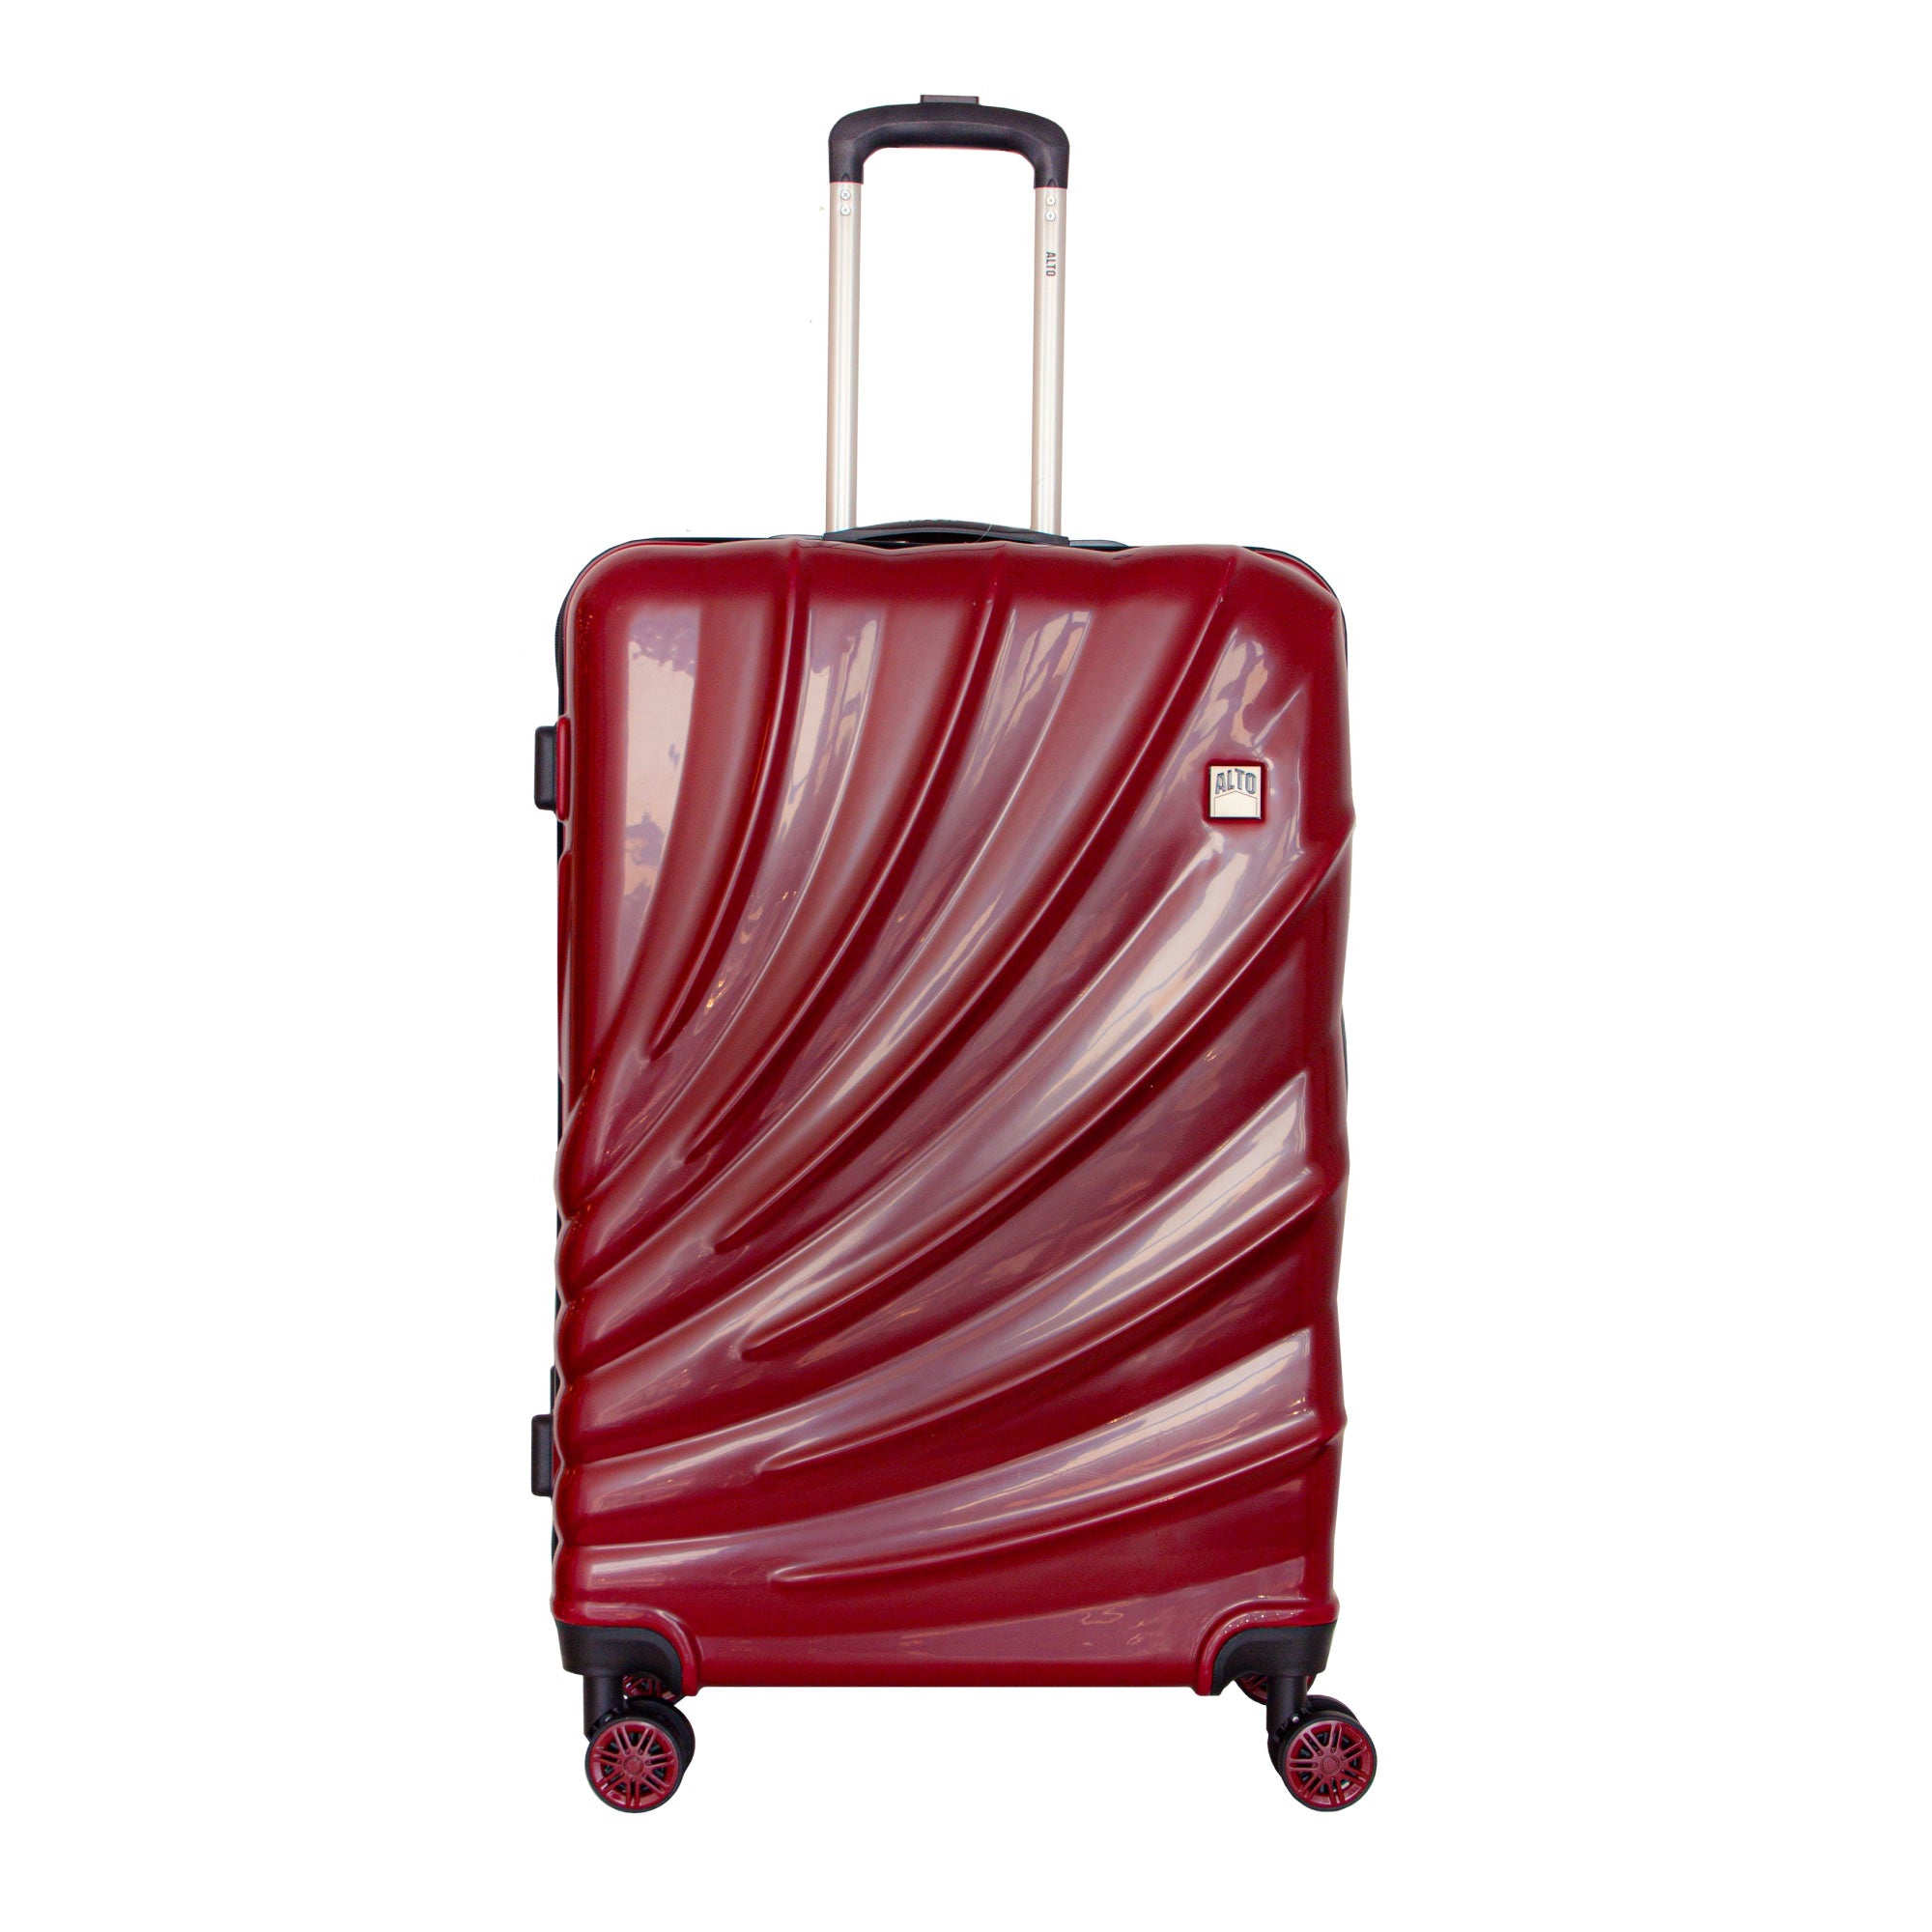 Alto Global ABS Luggage Suitcase - Red - Large  | TJ Hughes